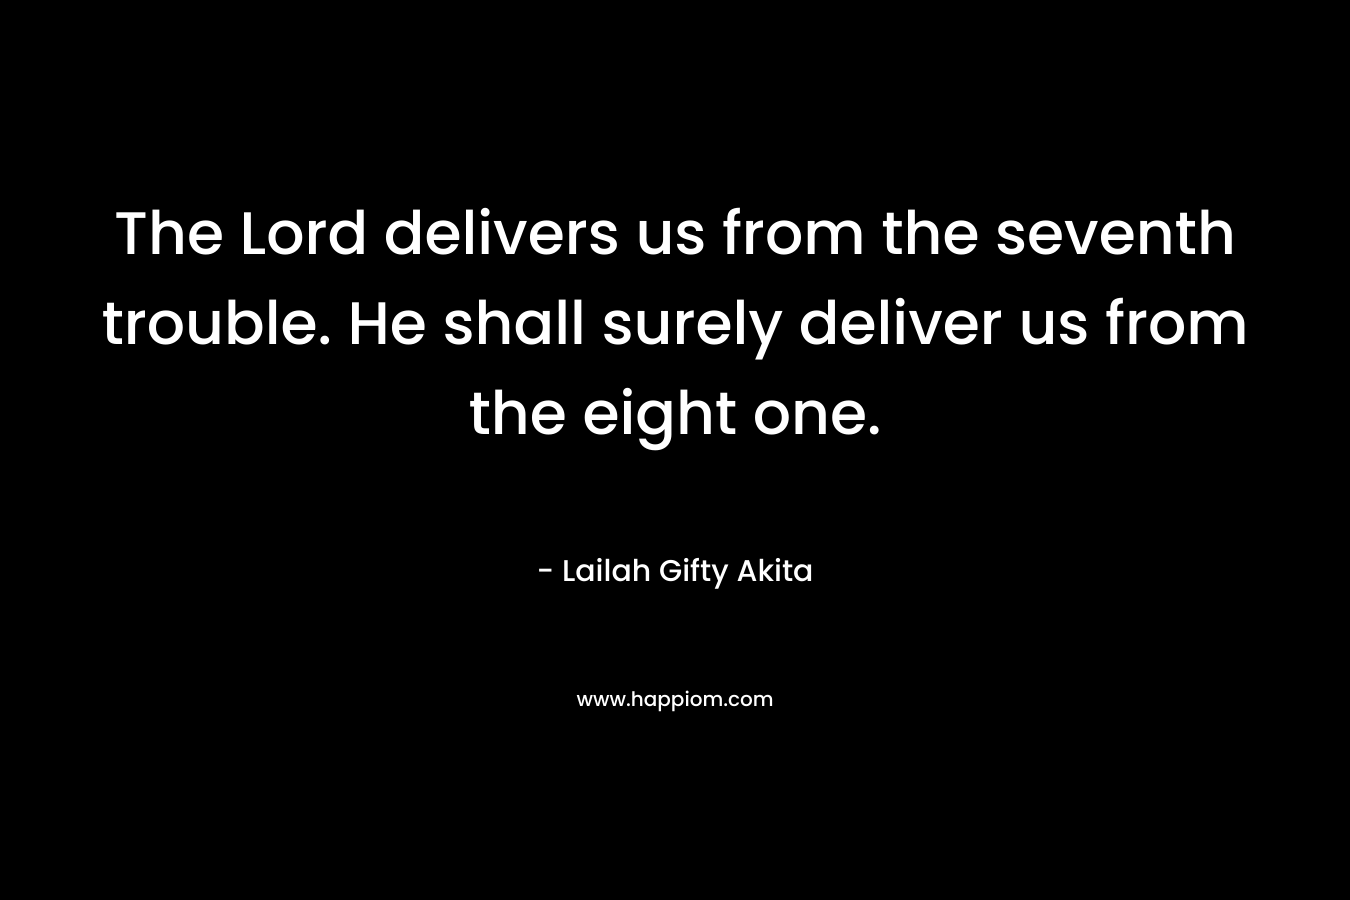 The Lord delivers us from the seventh trouble. He shall surely deliver us from the eight one. – Lailah Gifty Akita